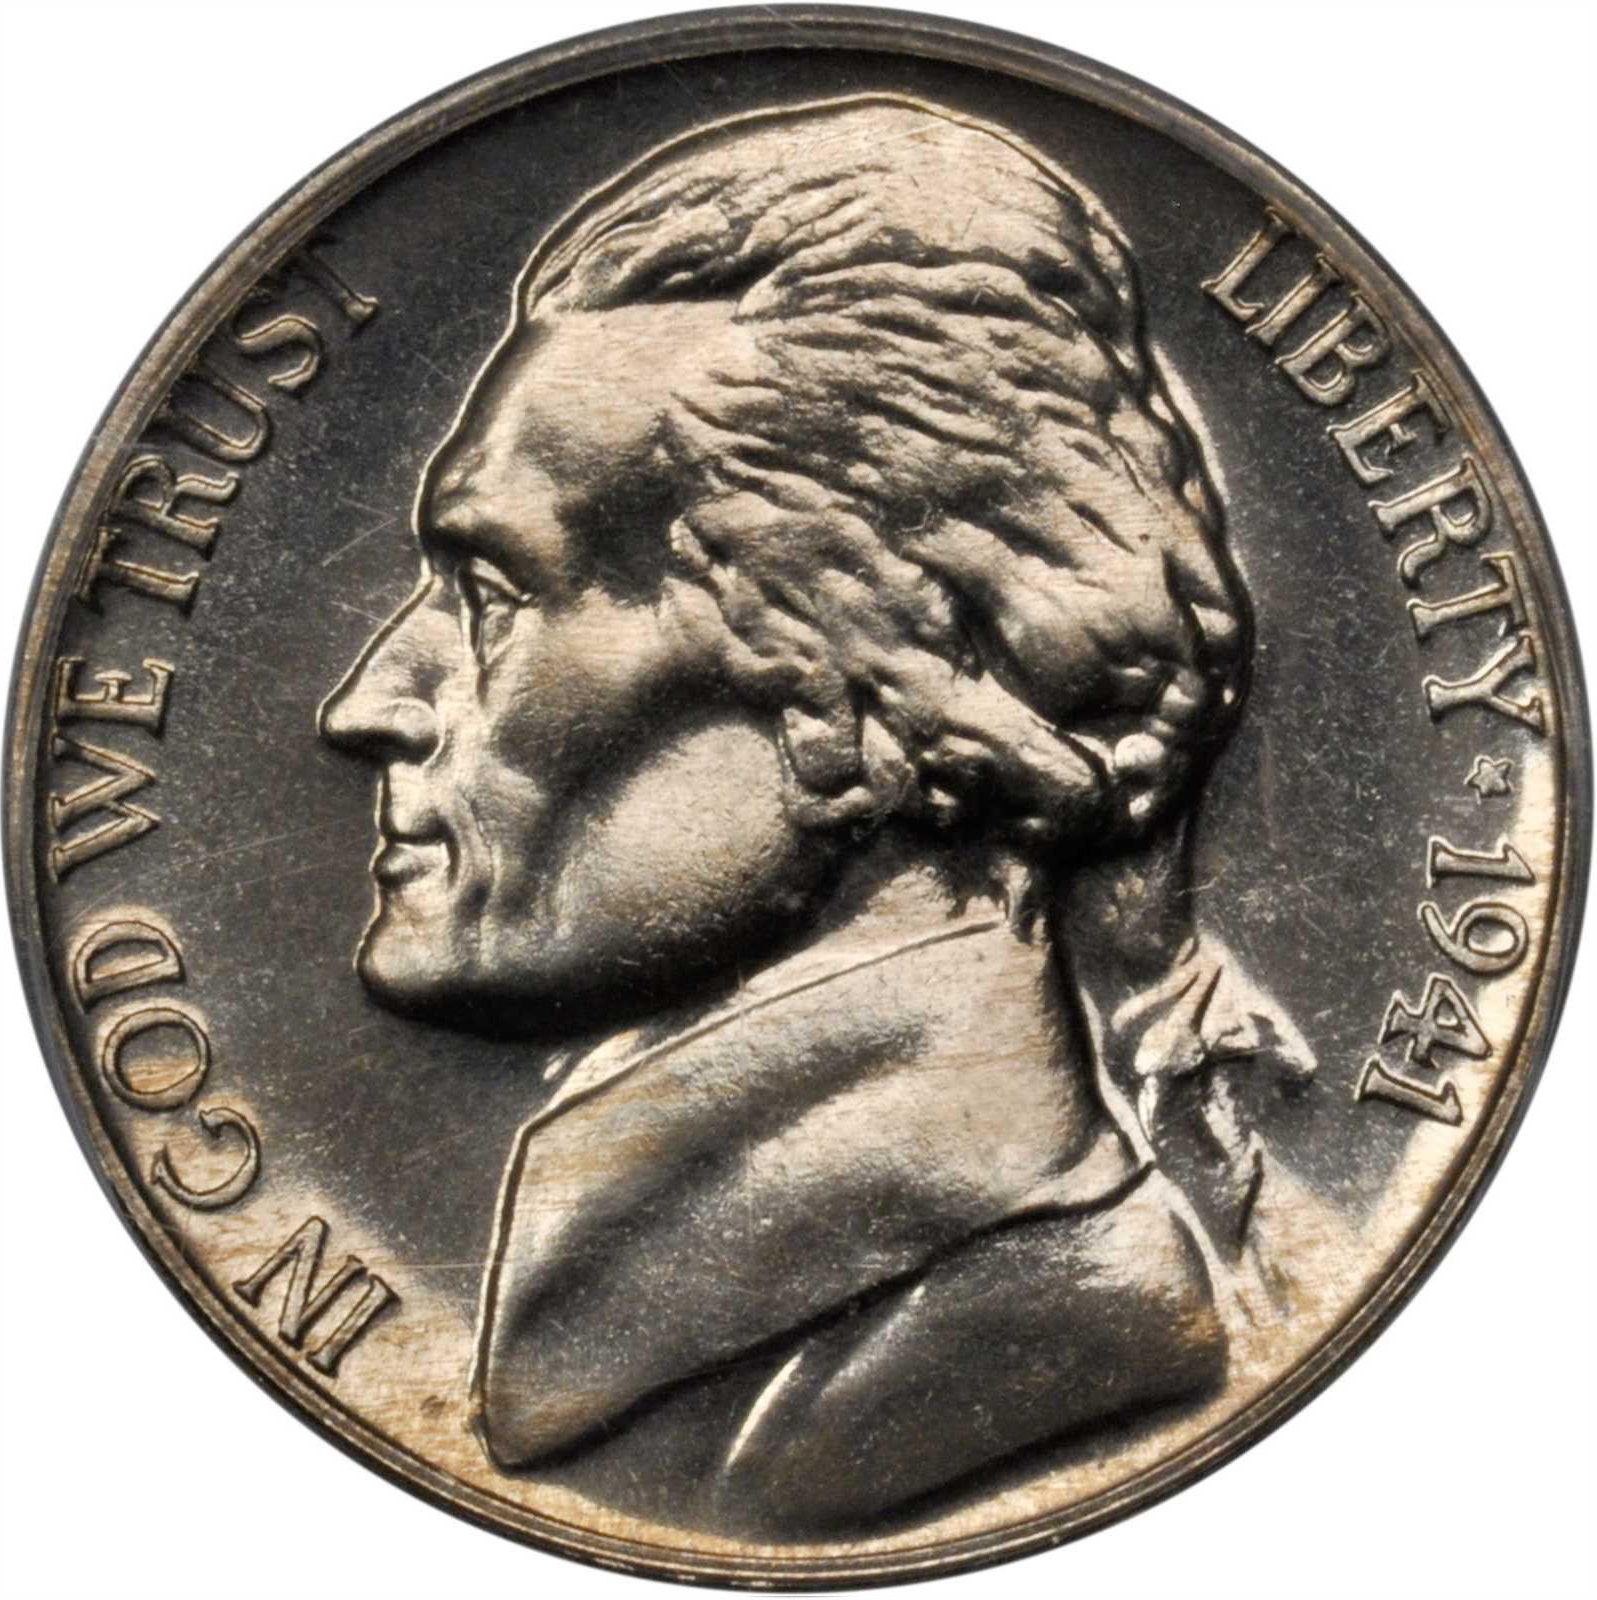 who is on the nickel coin